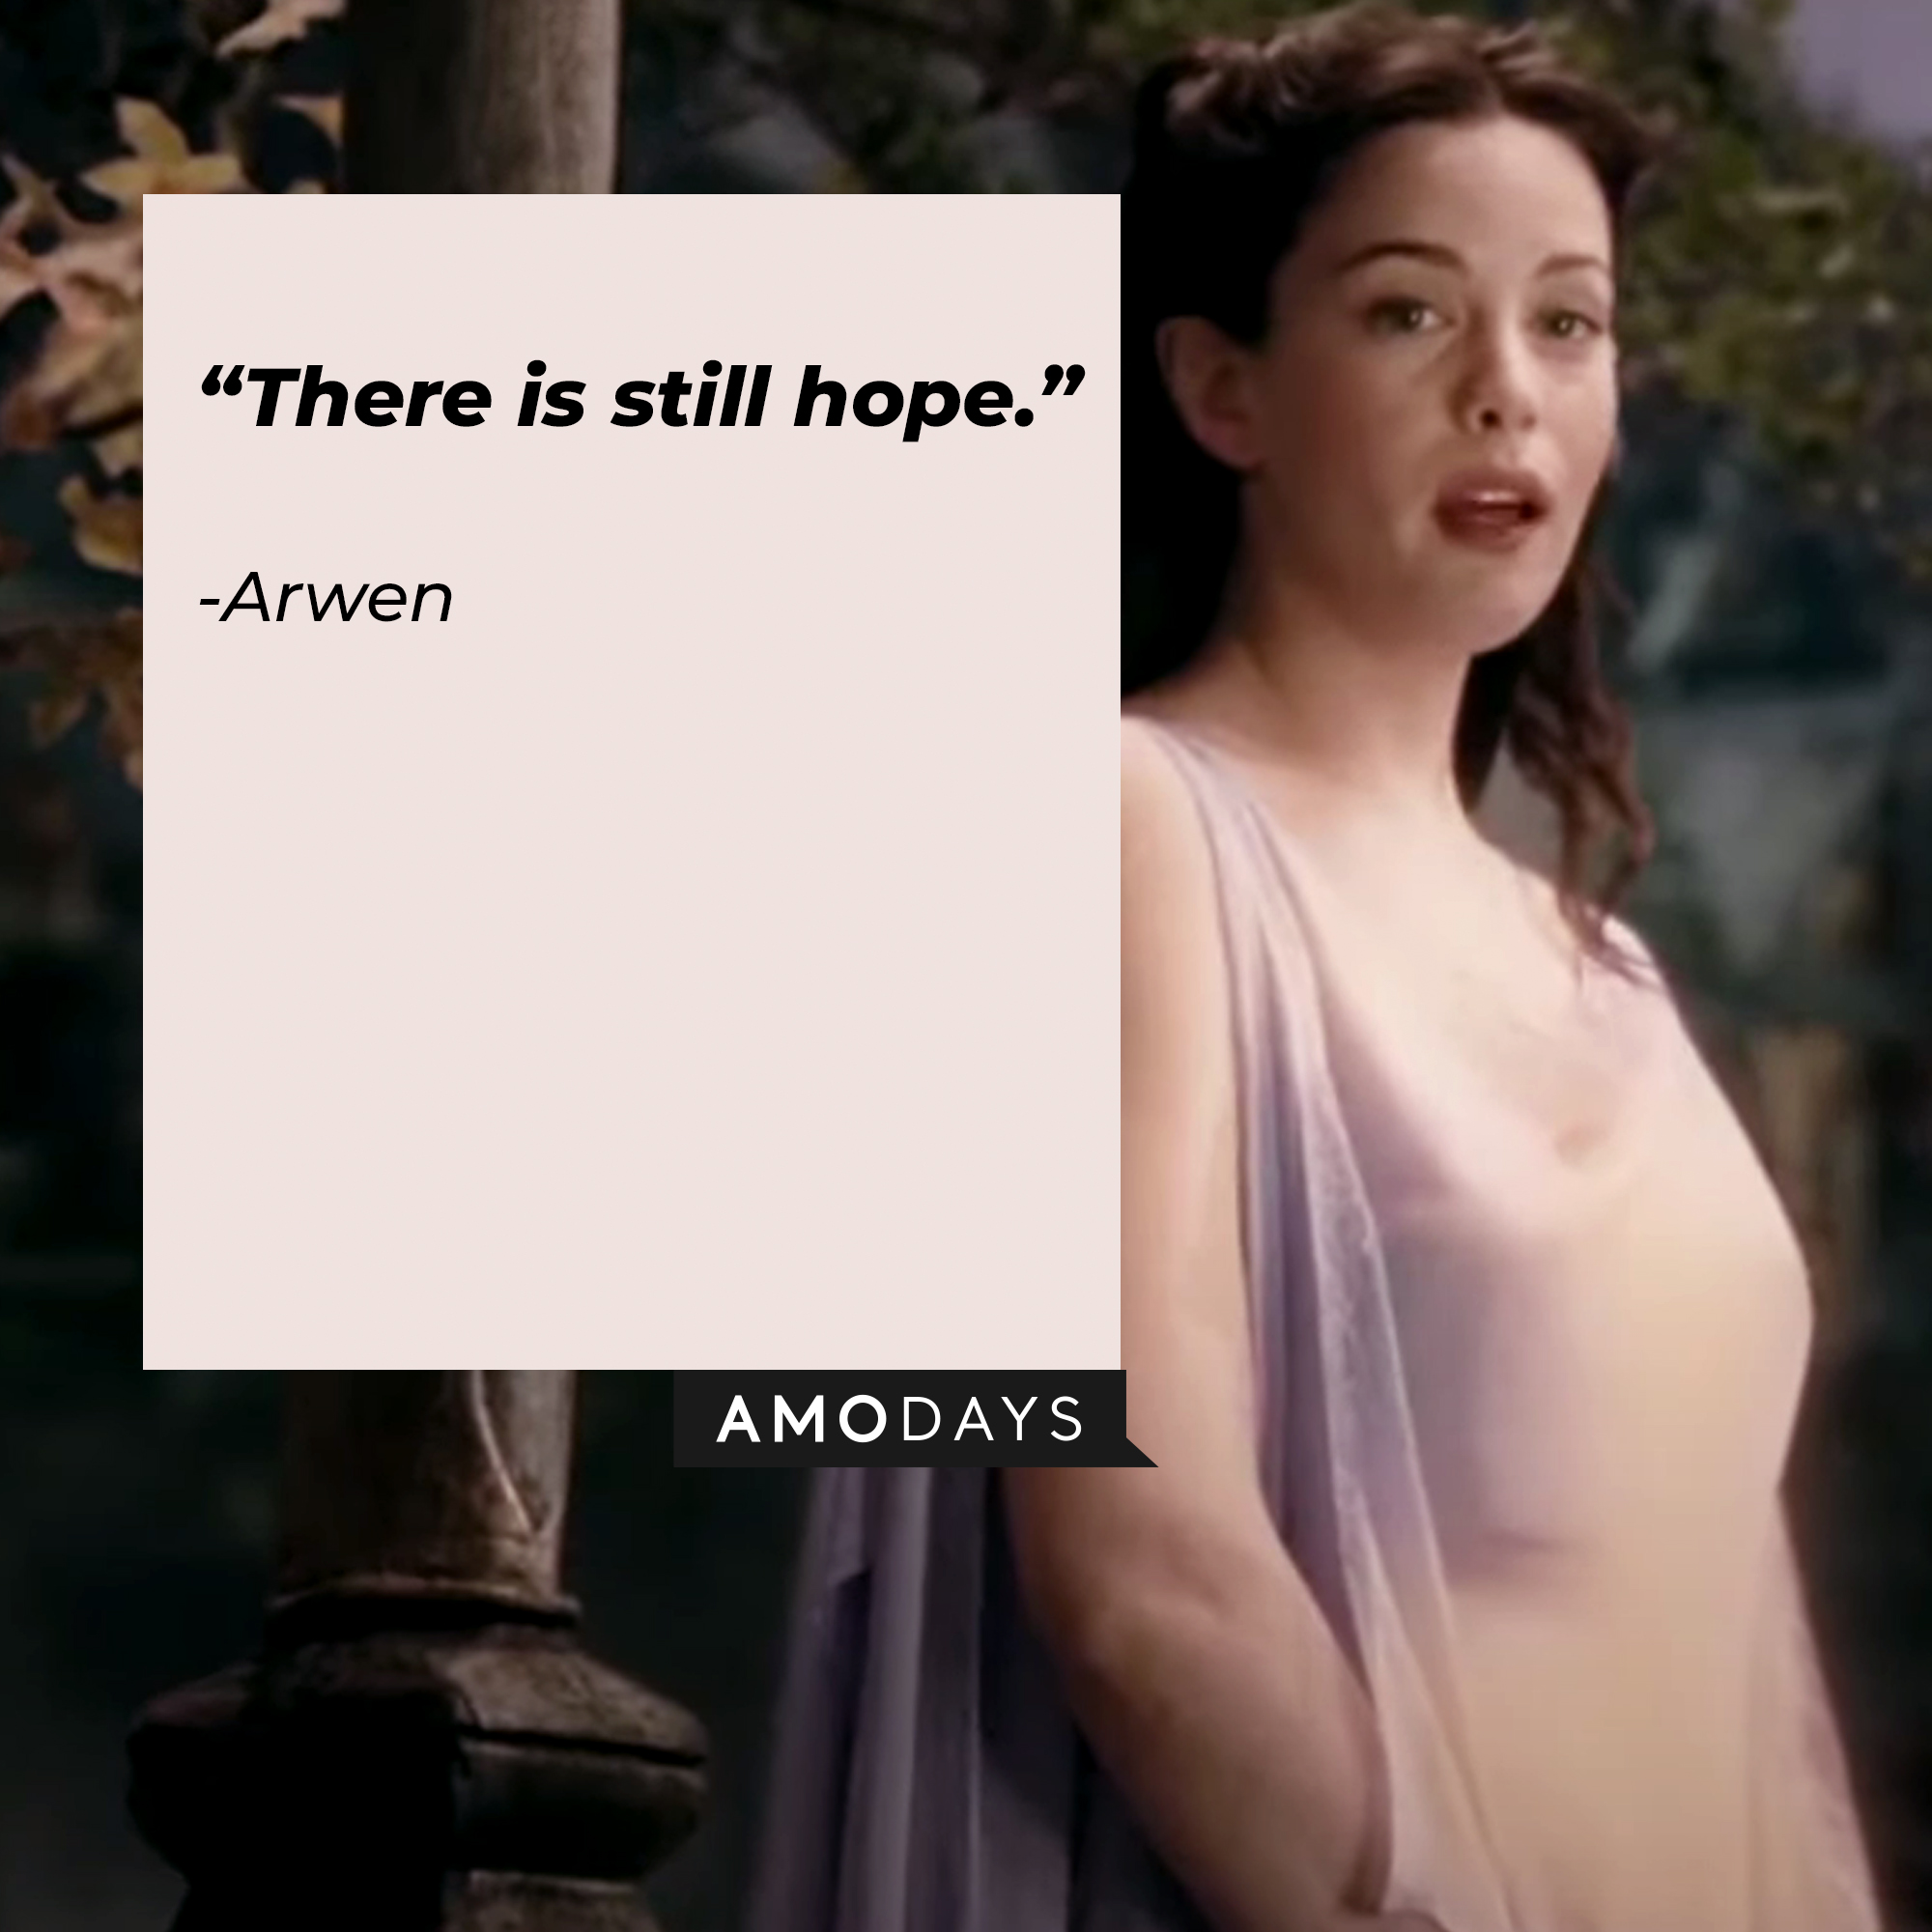 Arwen's quote : “There is still hope.” | Source: facebook.com/lordoftheringstrilogy